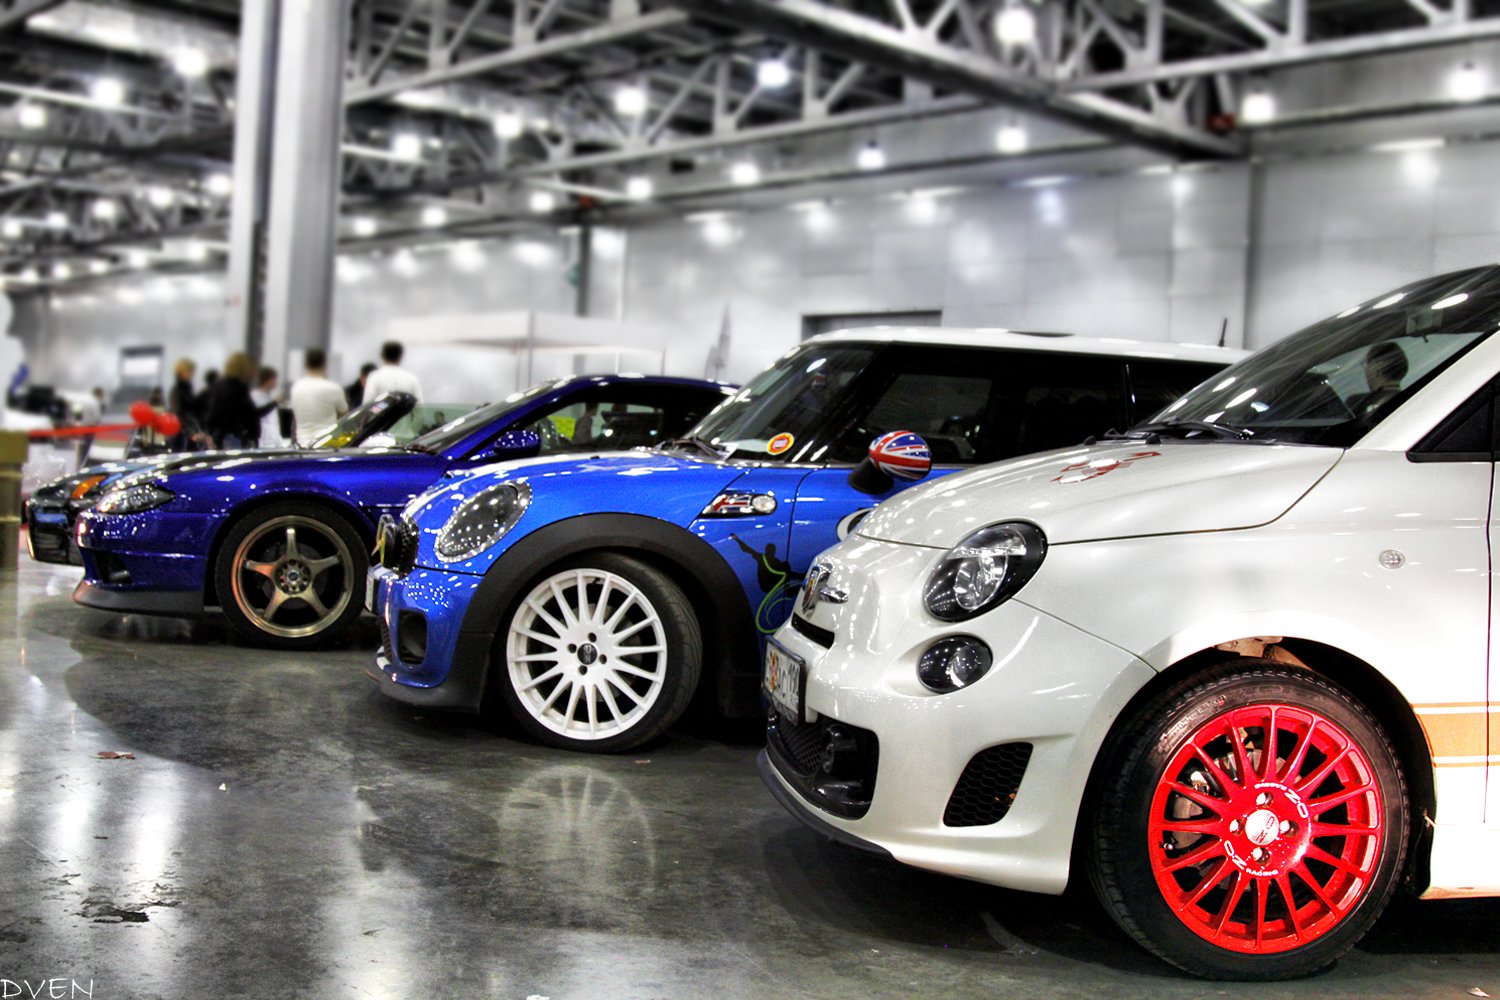 Moscow Tuning show. Машина волк на Moscow Tuning show. ЮКТ тюнинг Москва. UCT тюнинг Москва снаружи. Tuning moscow